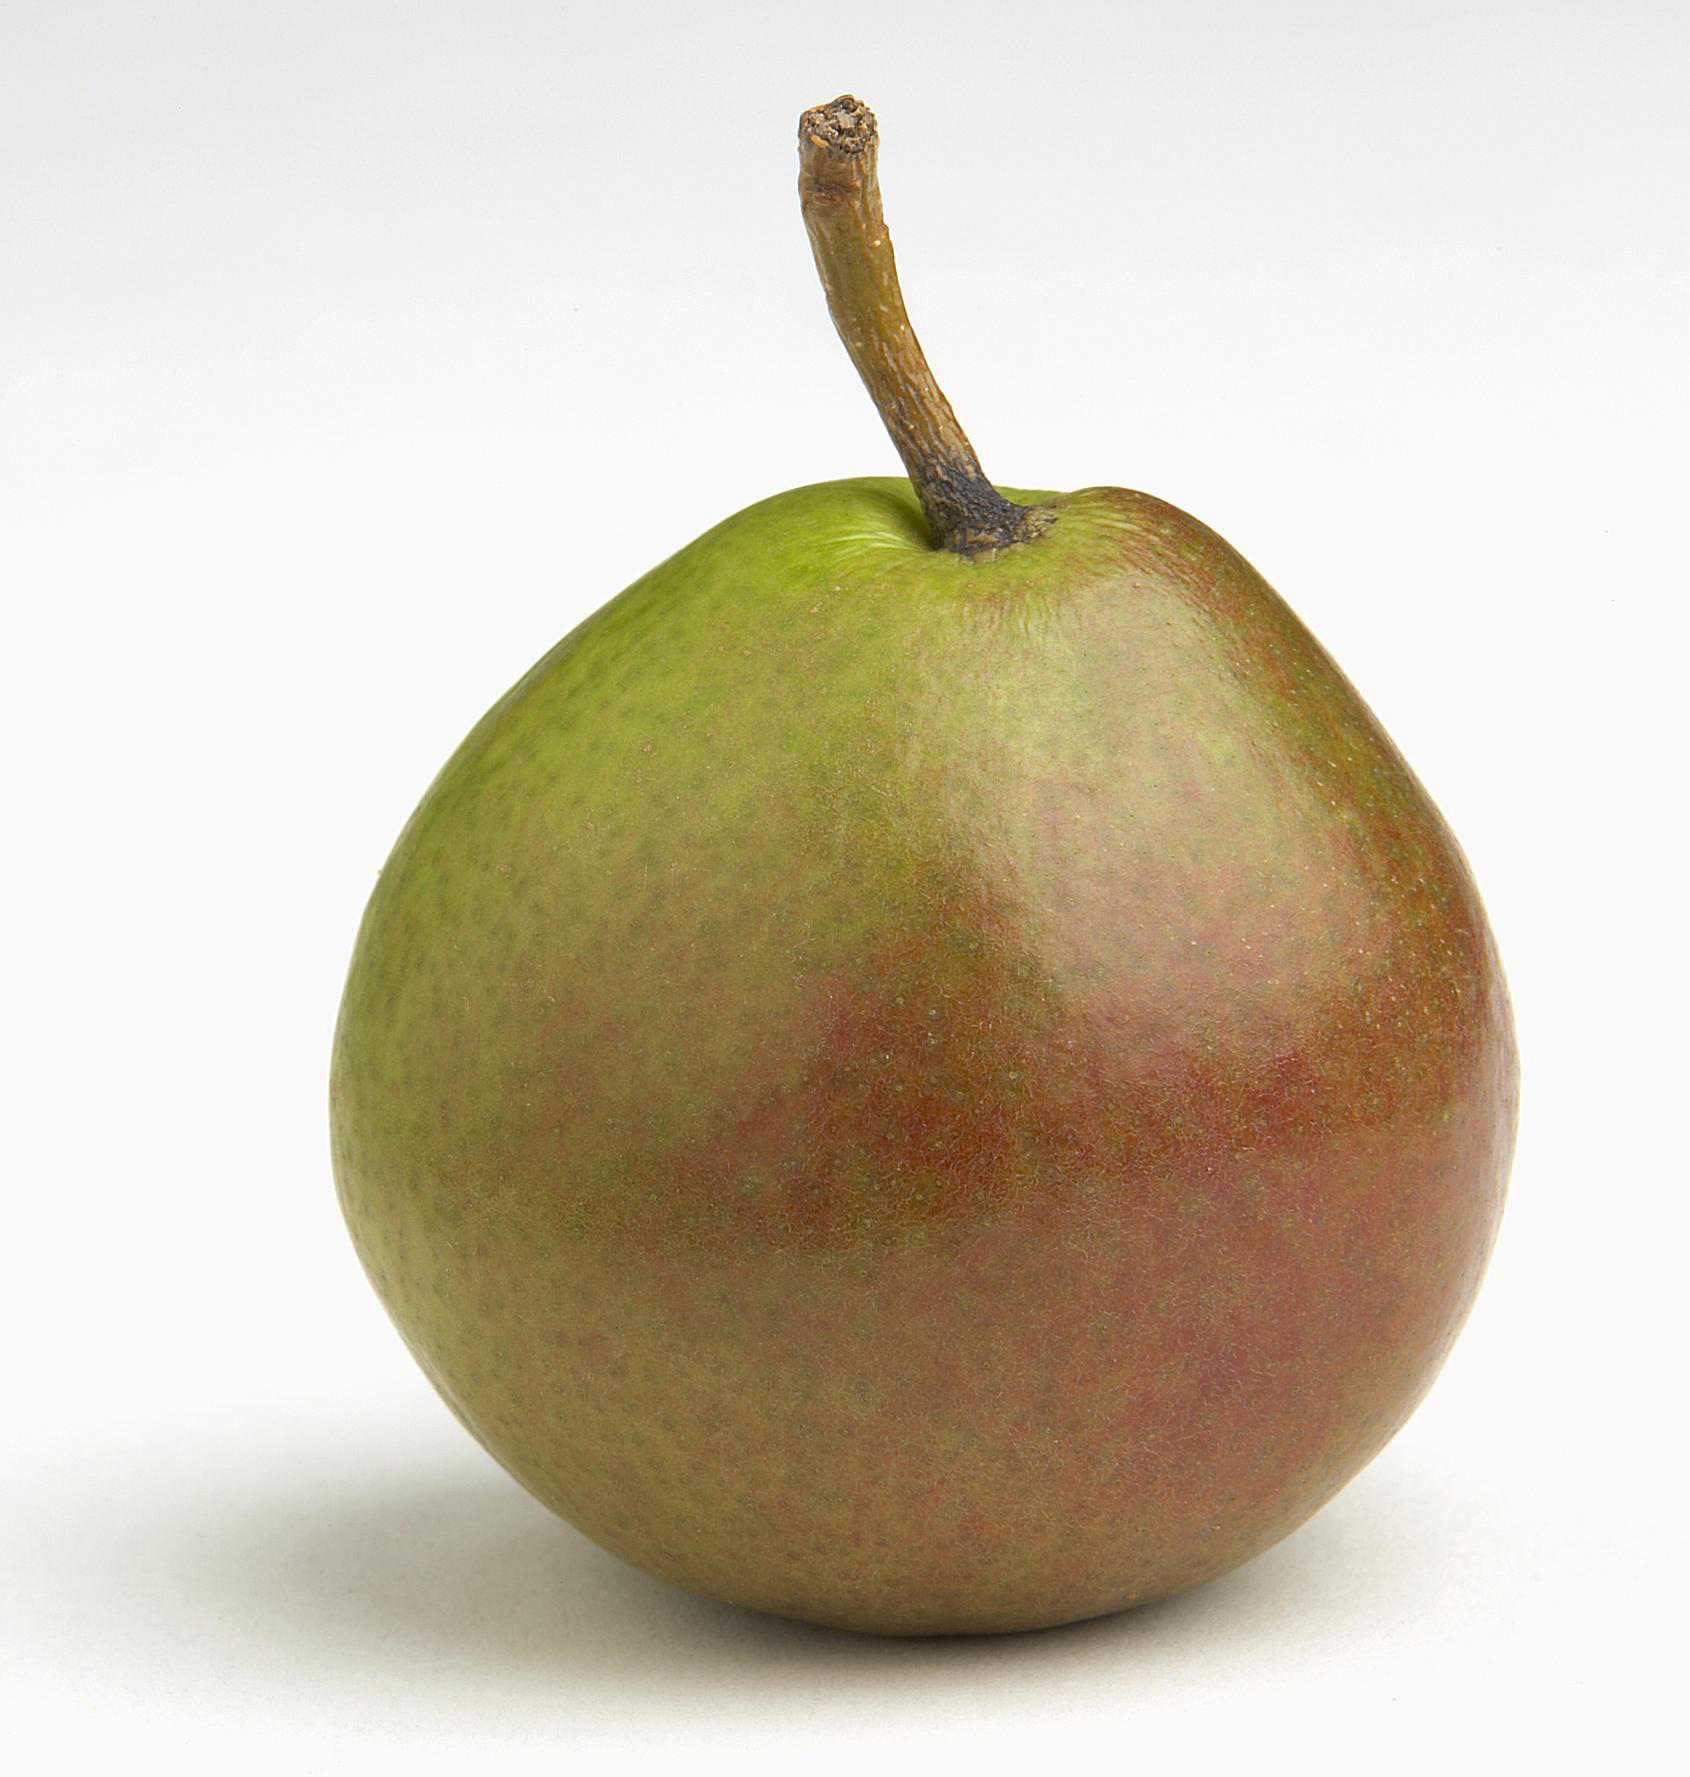 A Guide to Varieties of Pears - From Anjou to Williams